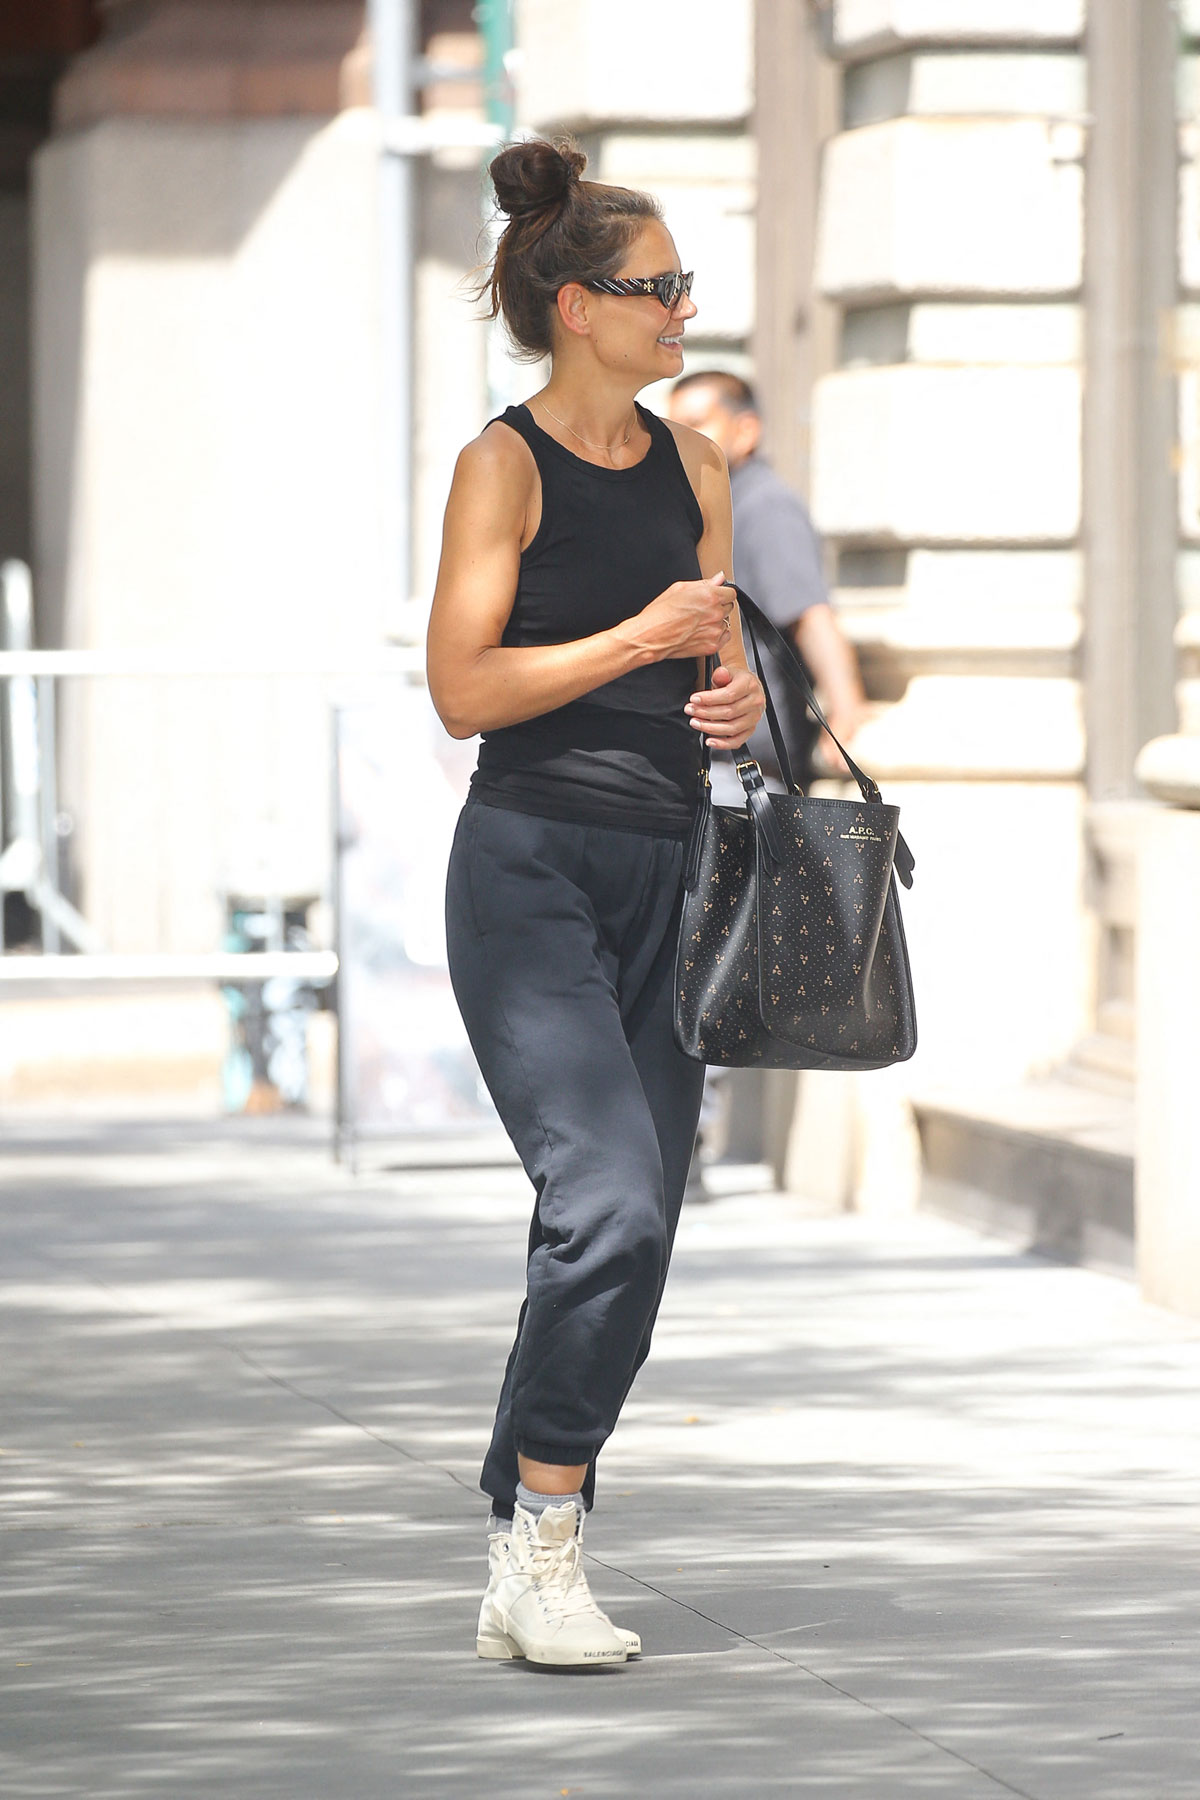 Katie Holmes leaves the gym in NYC